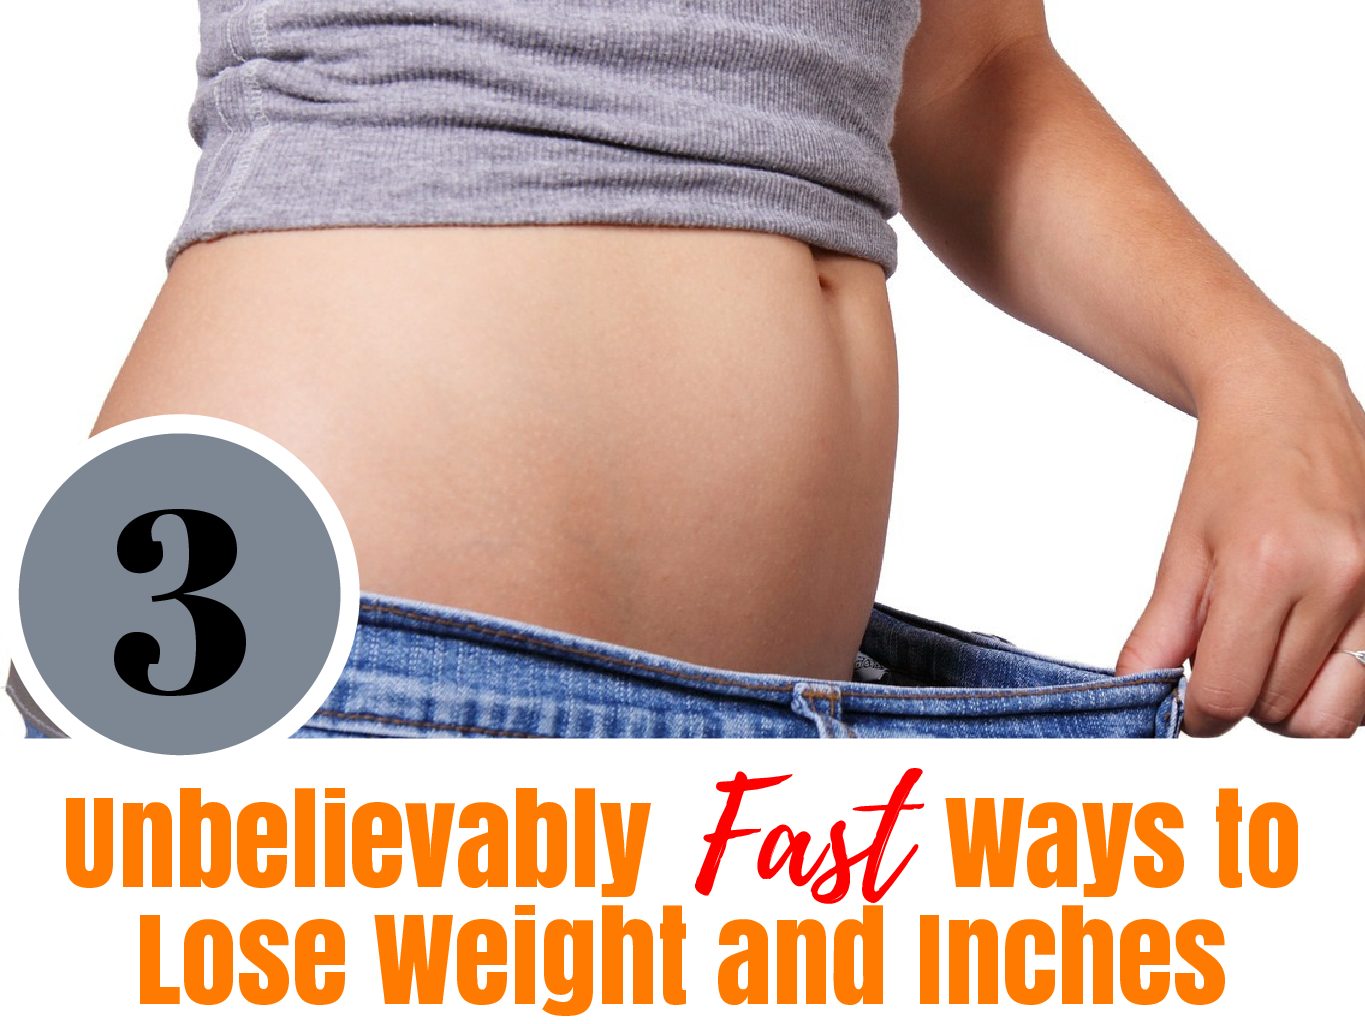 3 Unbelievably Fast Ways to Lose Weight and Inches